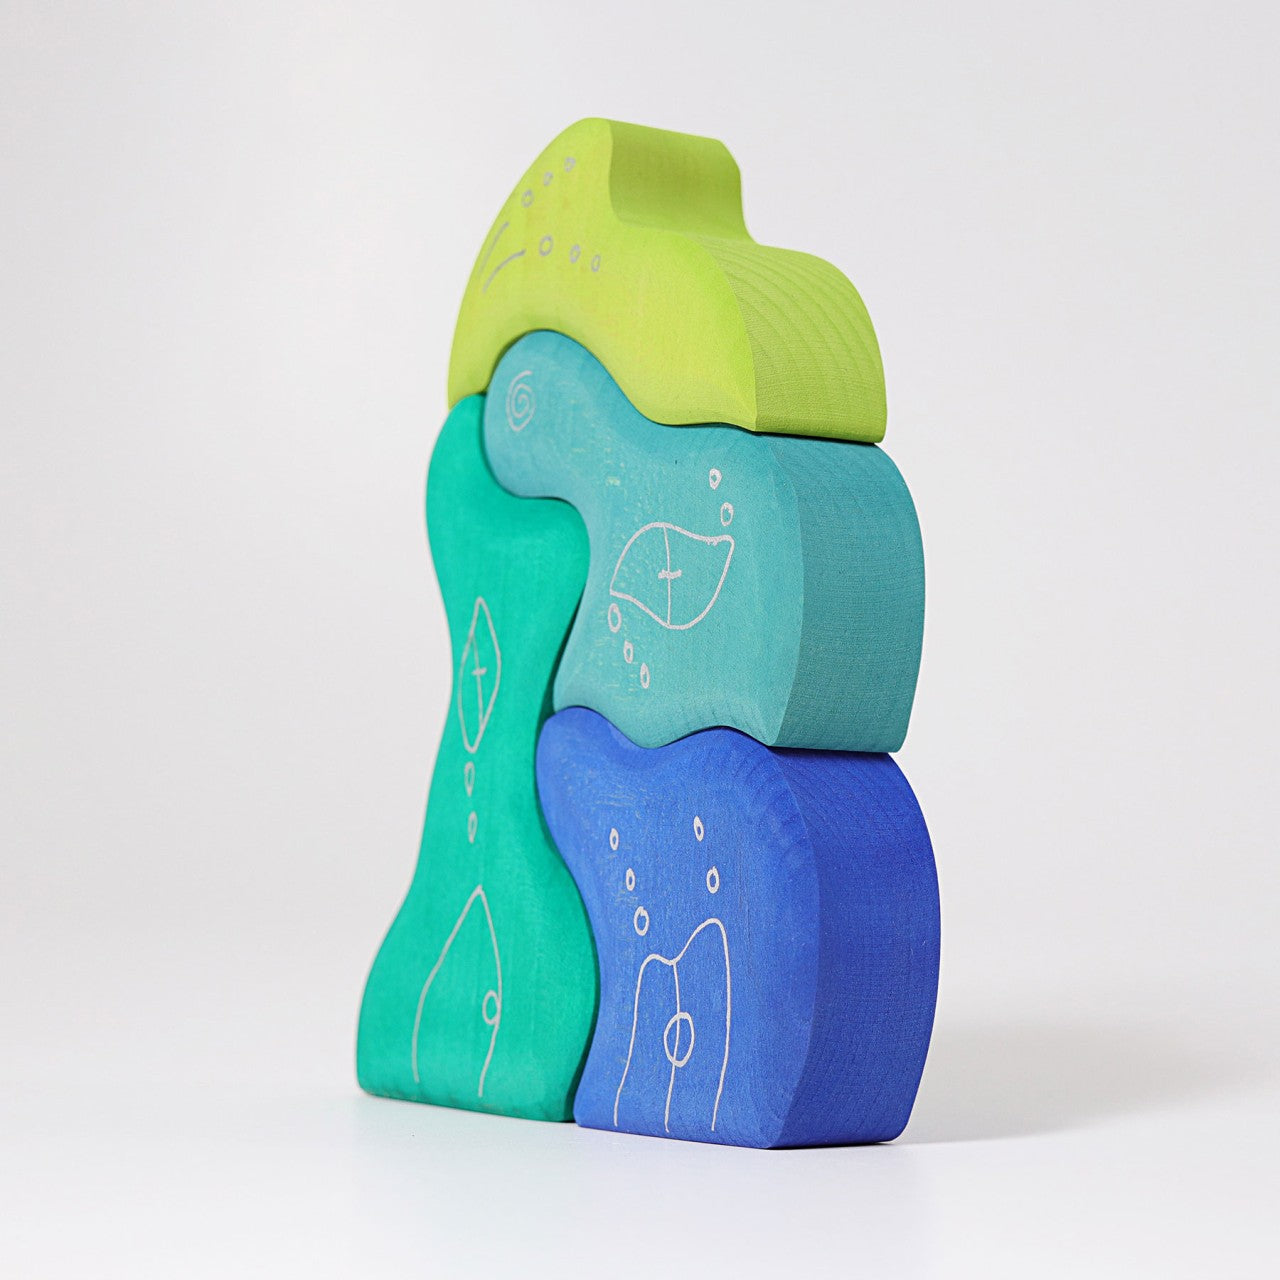 Casa Aqua | 4 Pieces | Wooden Toys for Kids | Open-Ended Play